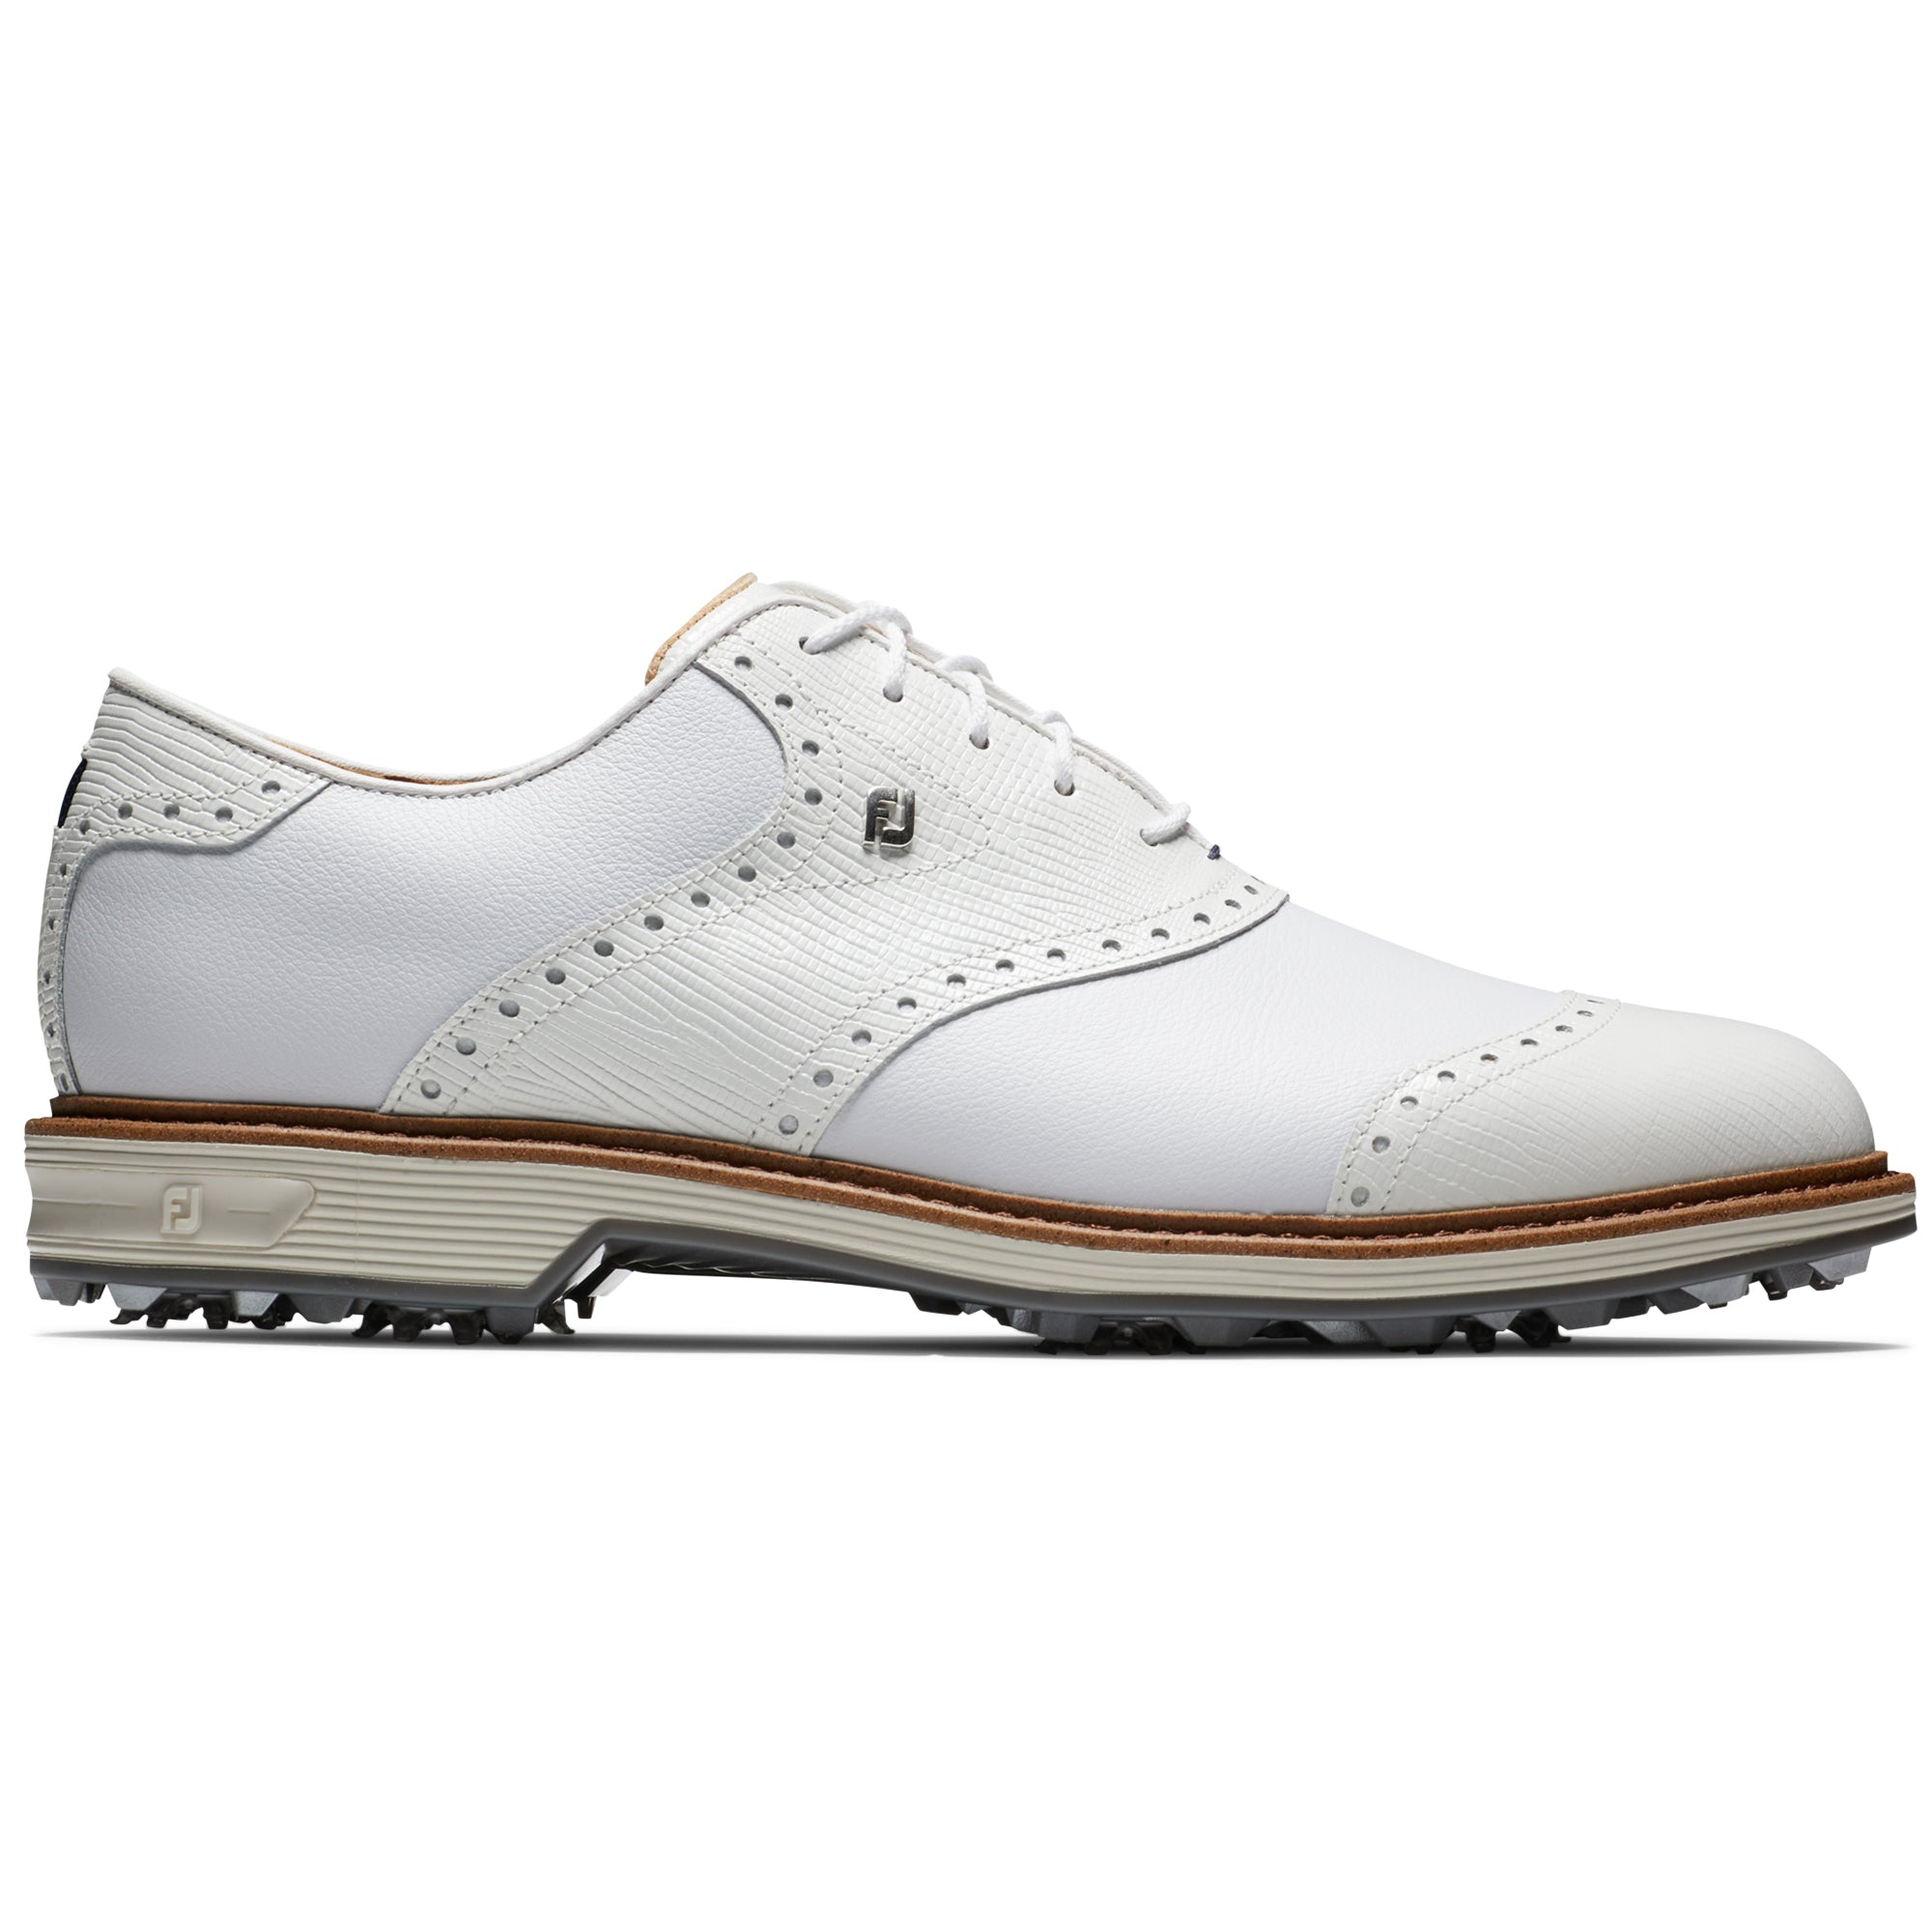 FootJoy Premiere Series Wilcox Golf Shoes 54322 White | Function18